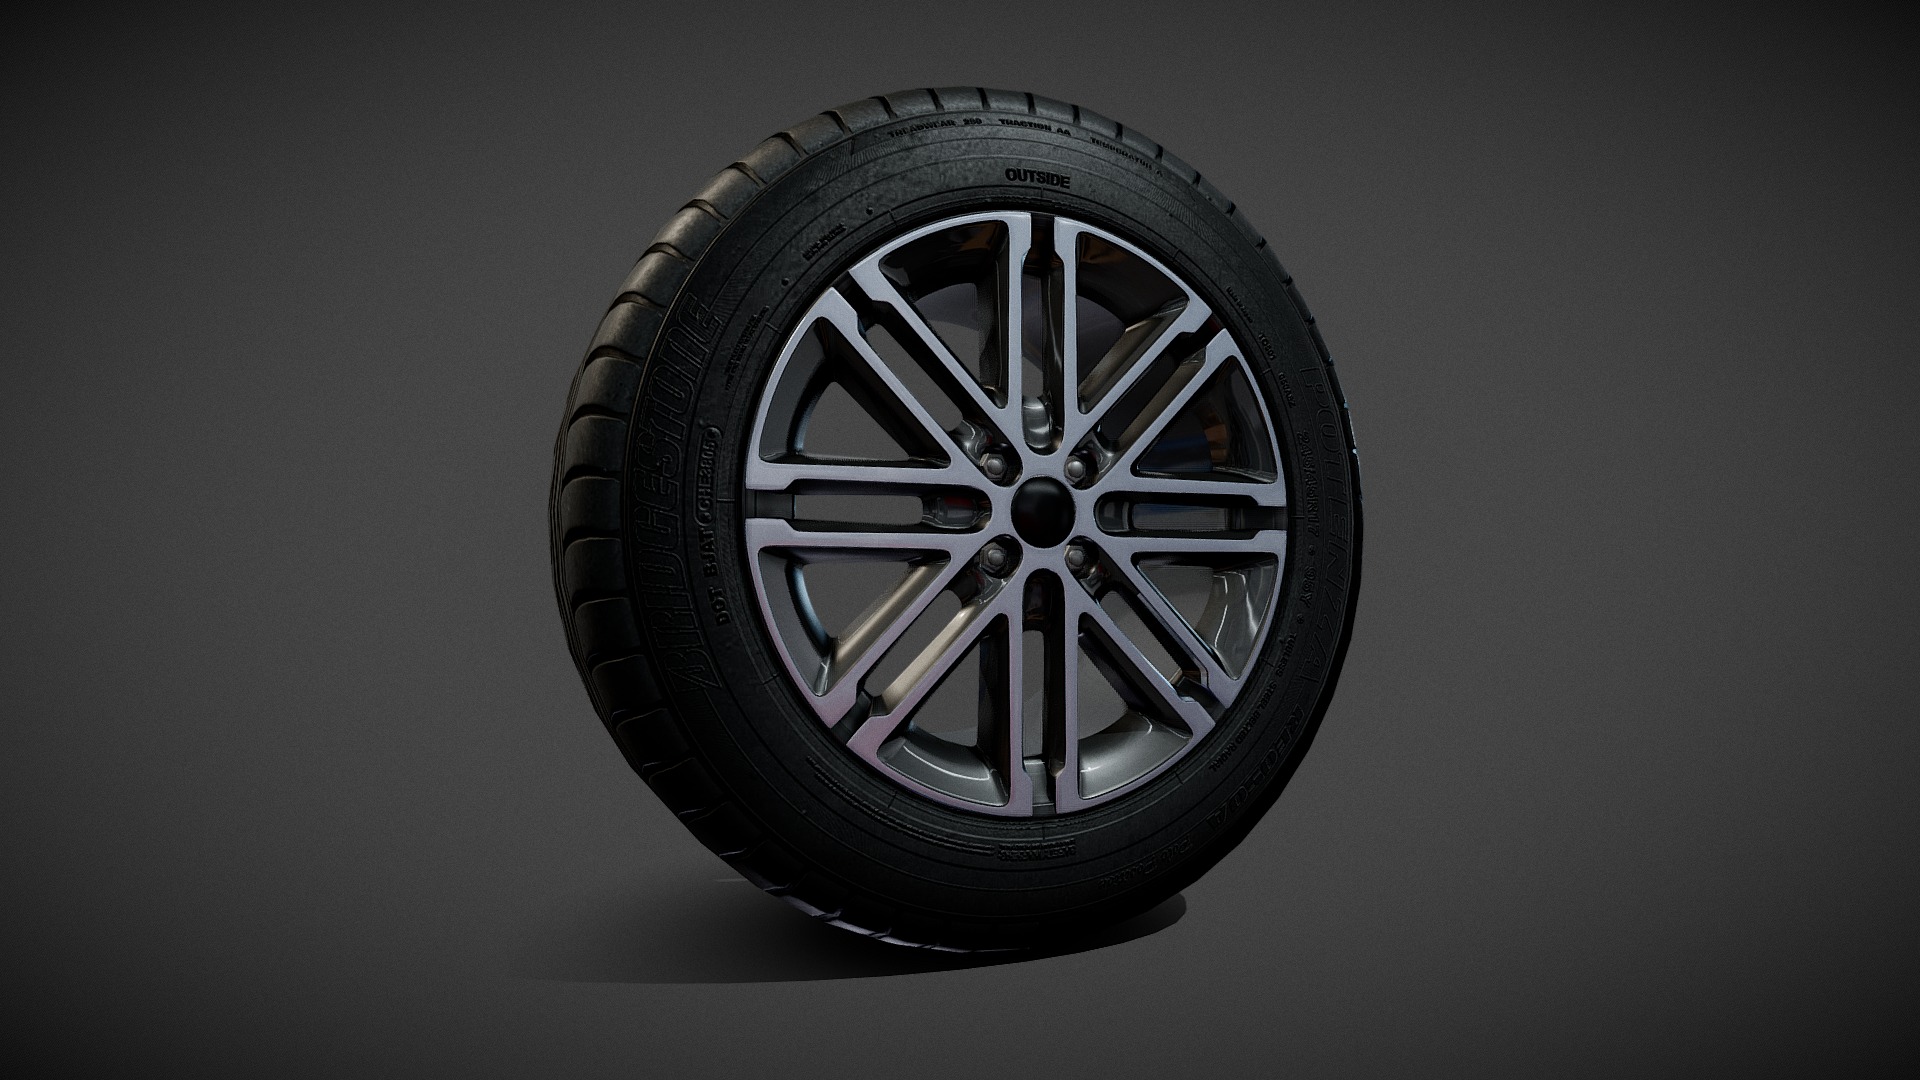 3D model Rin & Tyre - This is a 3D model of the Rin & Tyre. The 3D model is about a black and silver compass.